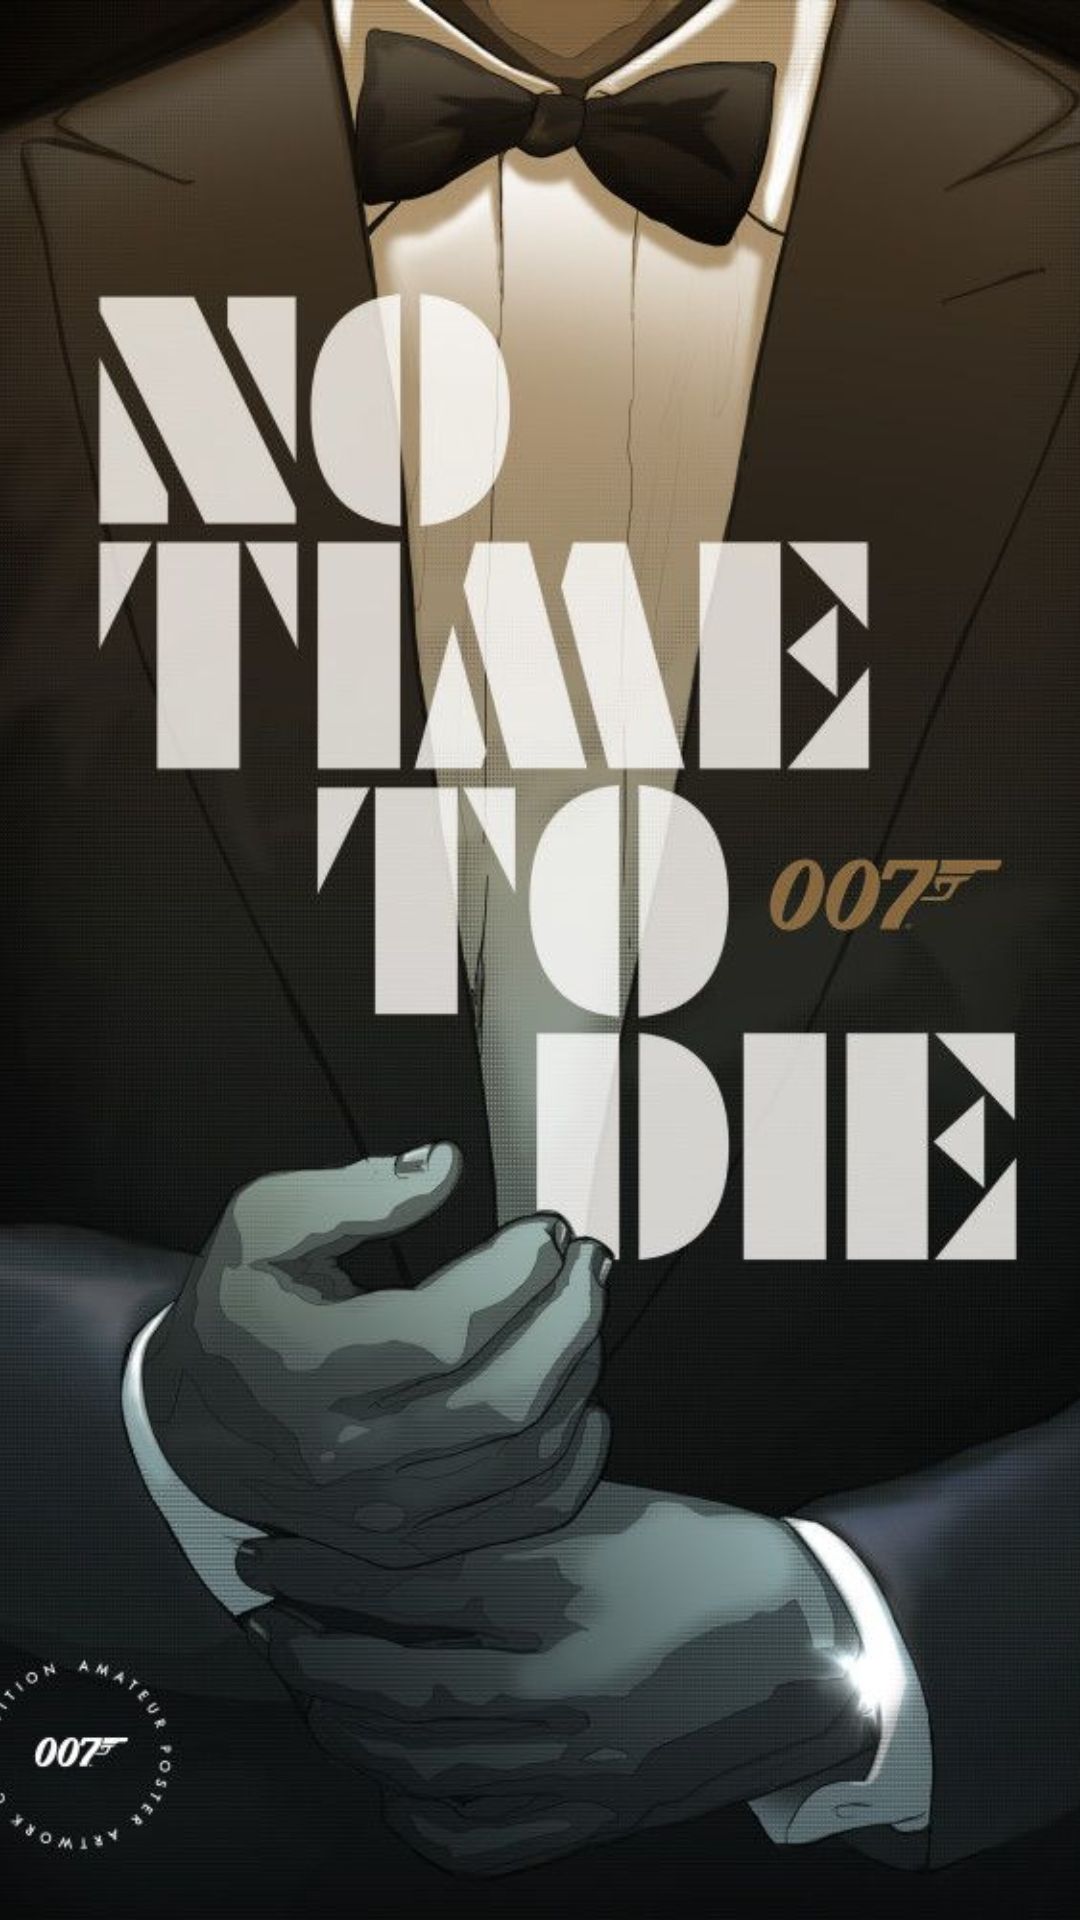 James Bond No Time To Die Wallpapers Top 35 Best James Bond No Time To Die Backgrounds Download